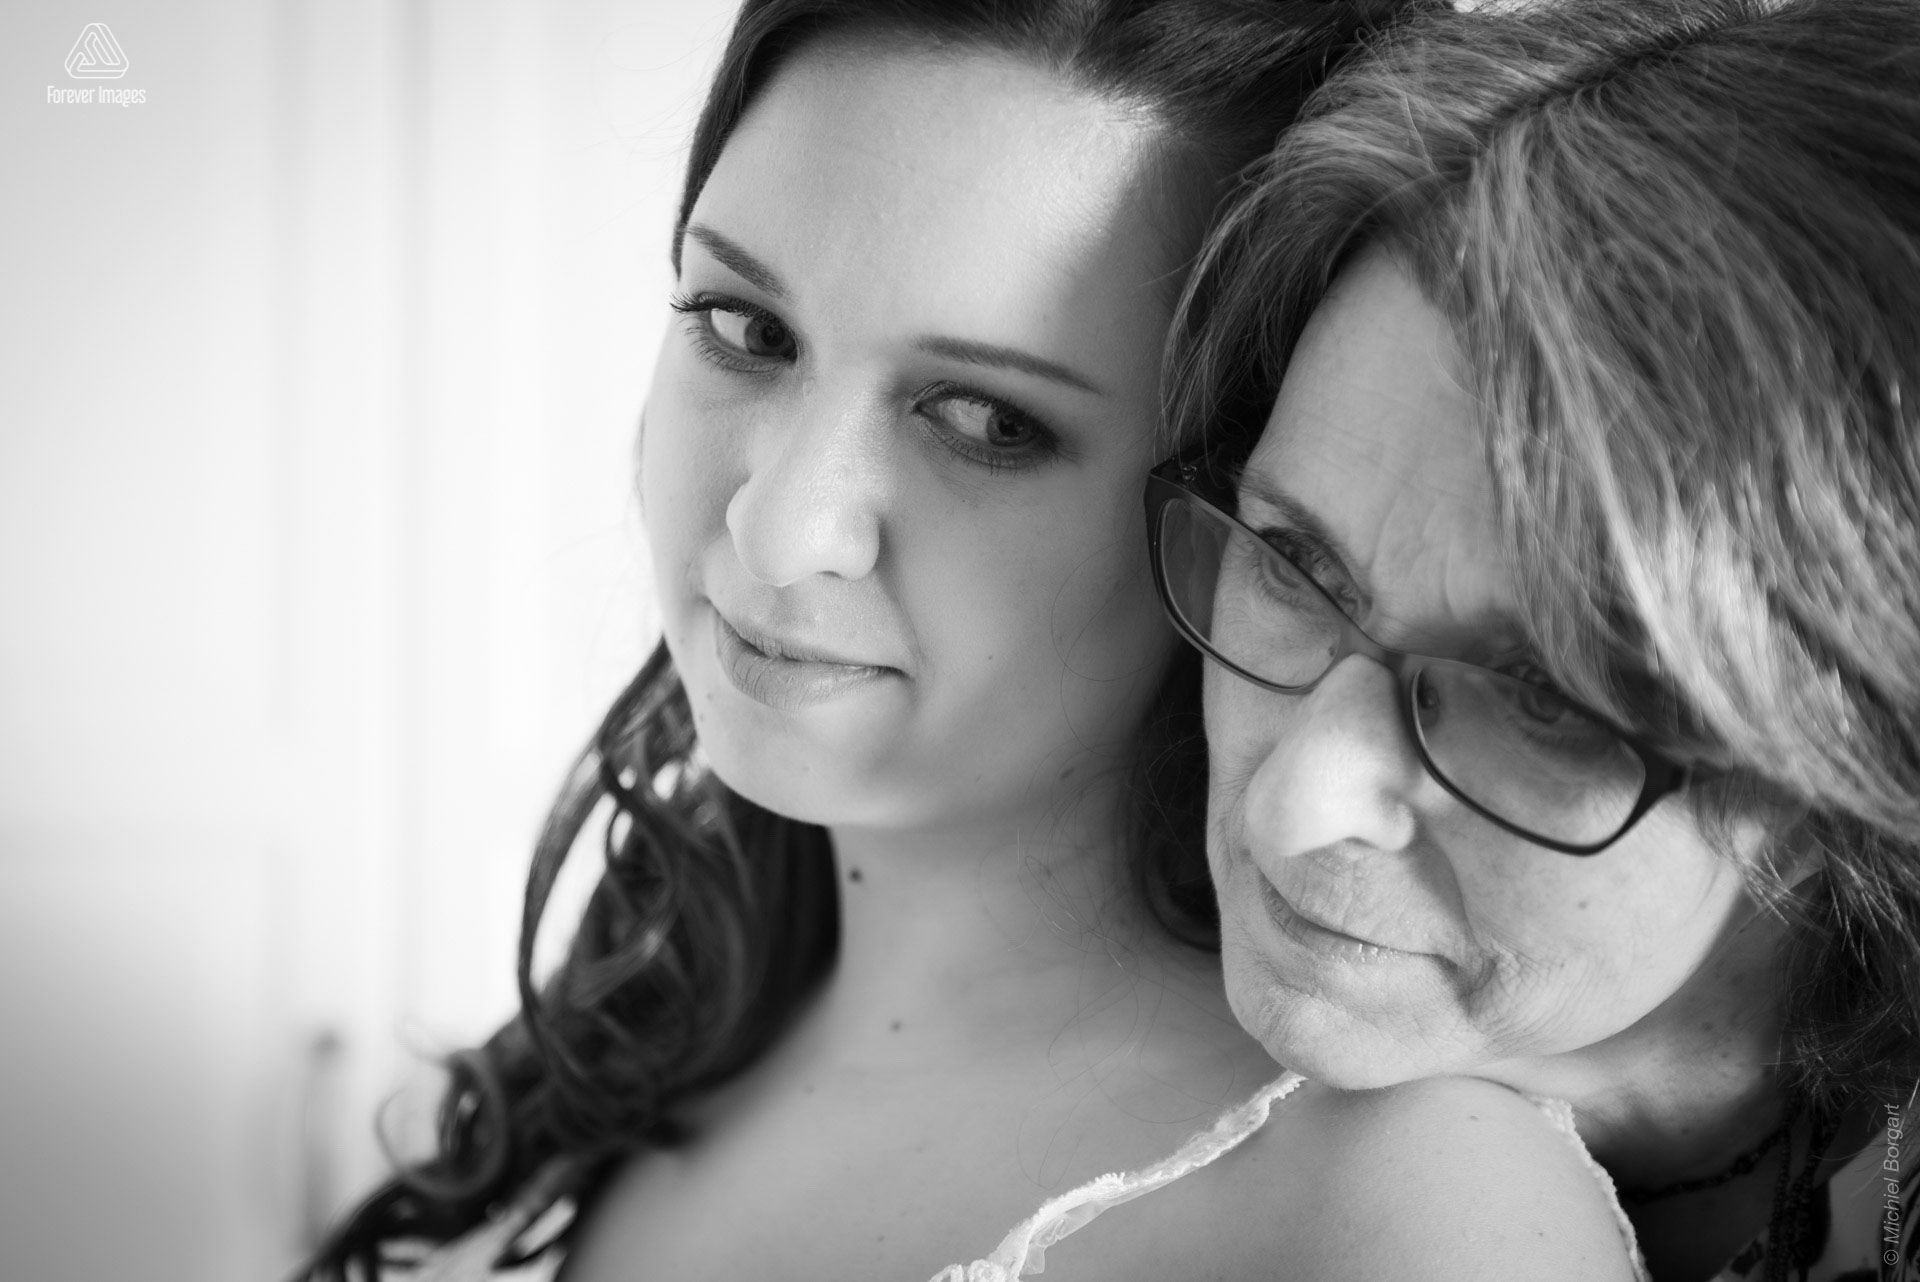 Bridal photo black and white B&W mother and daughter | Wedding Photographer Michiel Borgart - Forever Images.